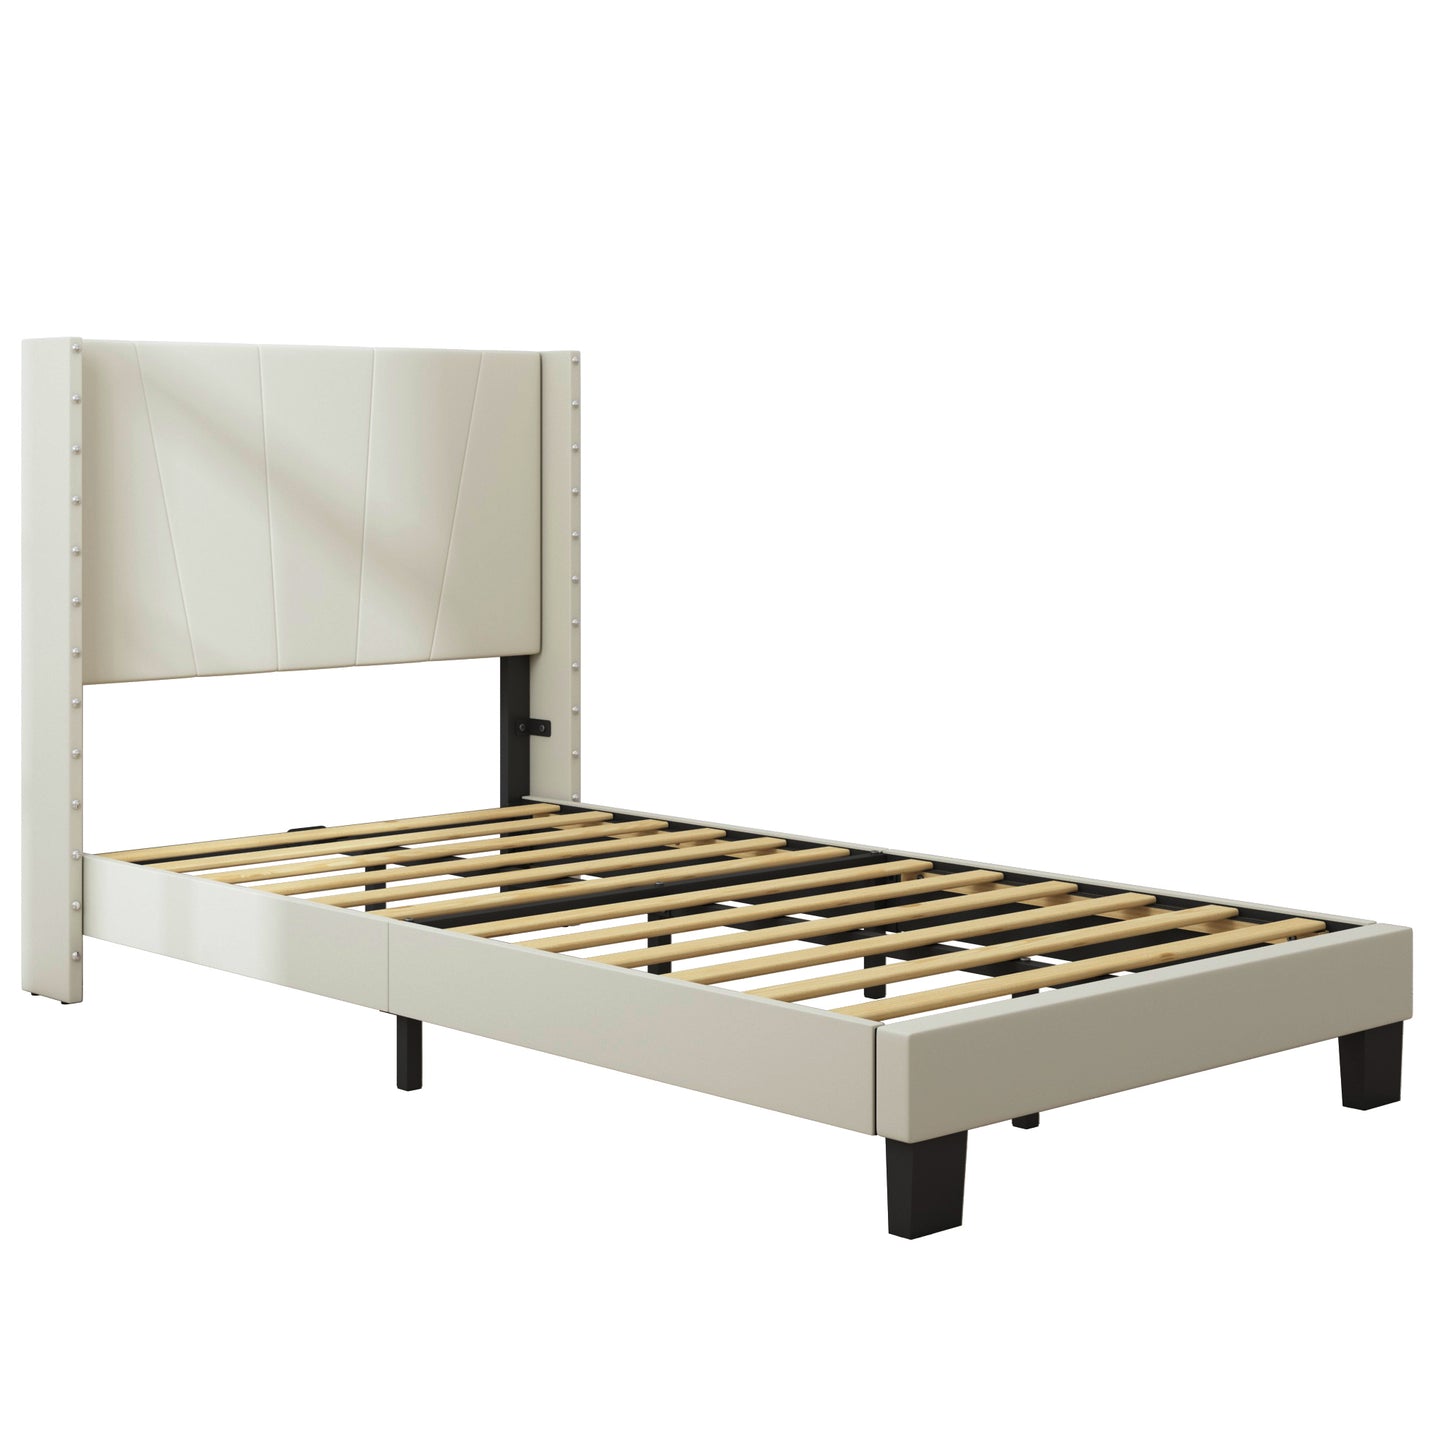 SYNGAR Twin Size Fabric Fully Upholstered Platform Bed Frame with Rivet Wingback Headboard, Sturdy Metal Frame, Strong Wooden Slats, No Box Spring Needed, Easy Assembly, Beige